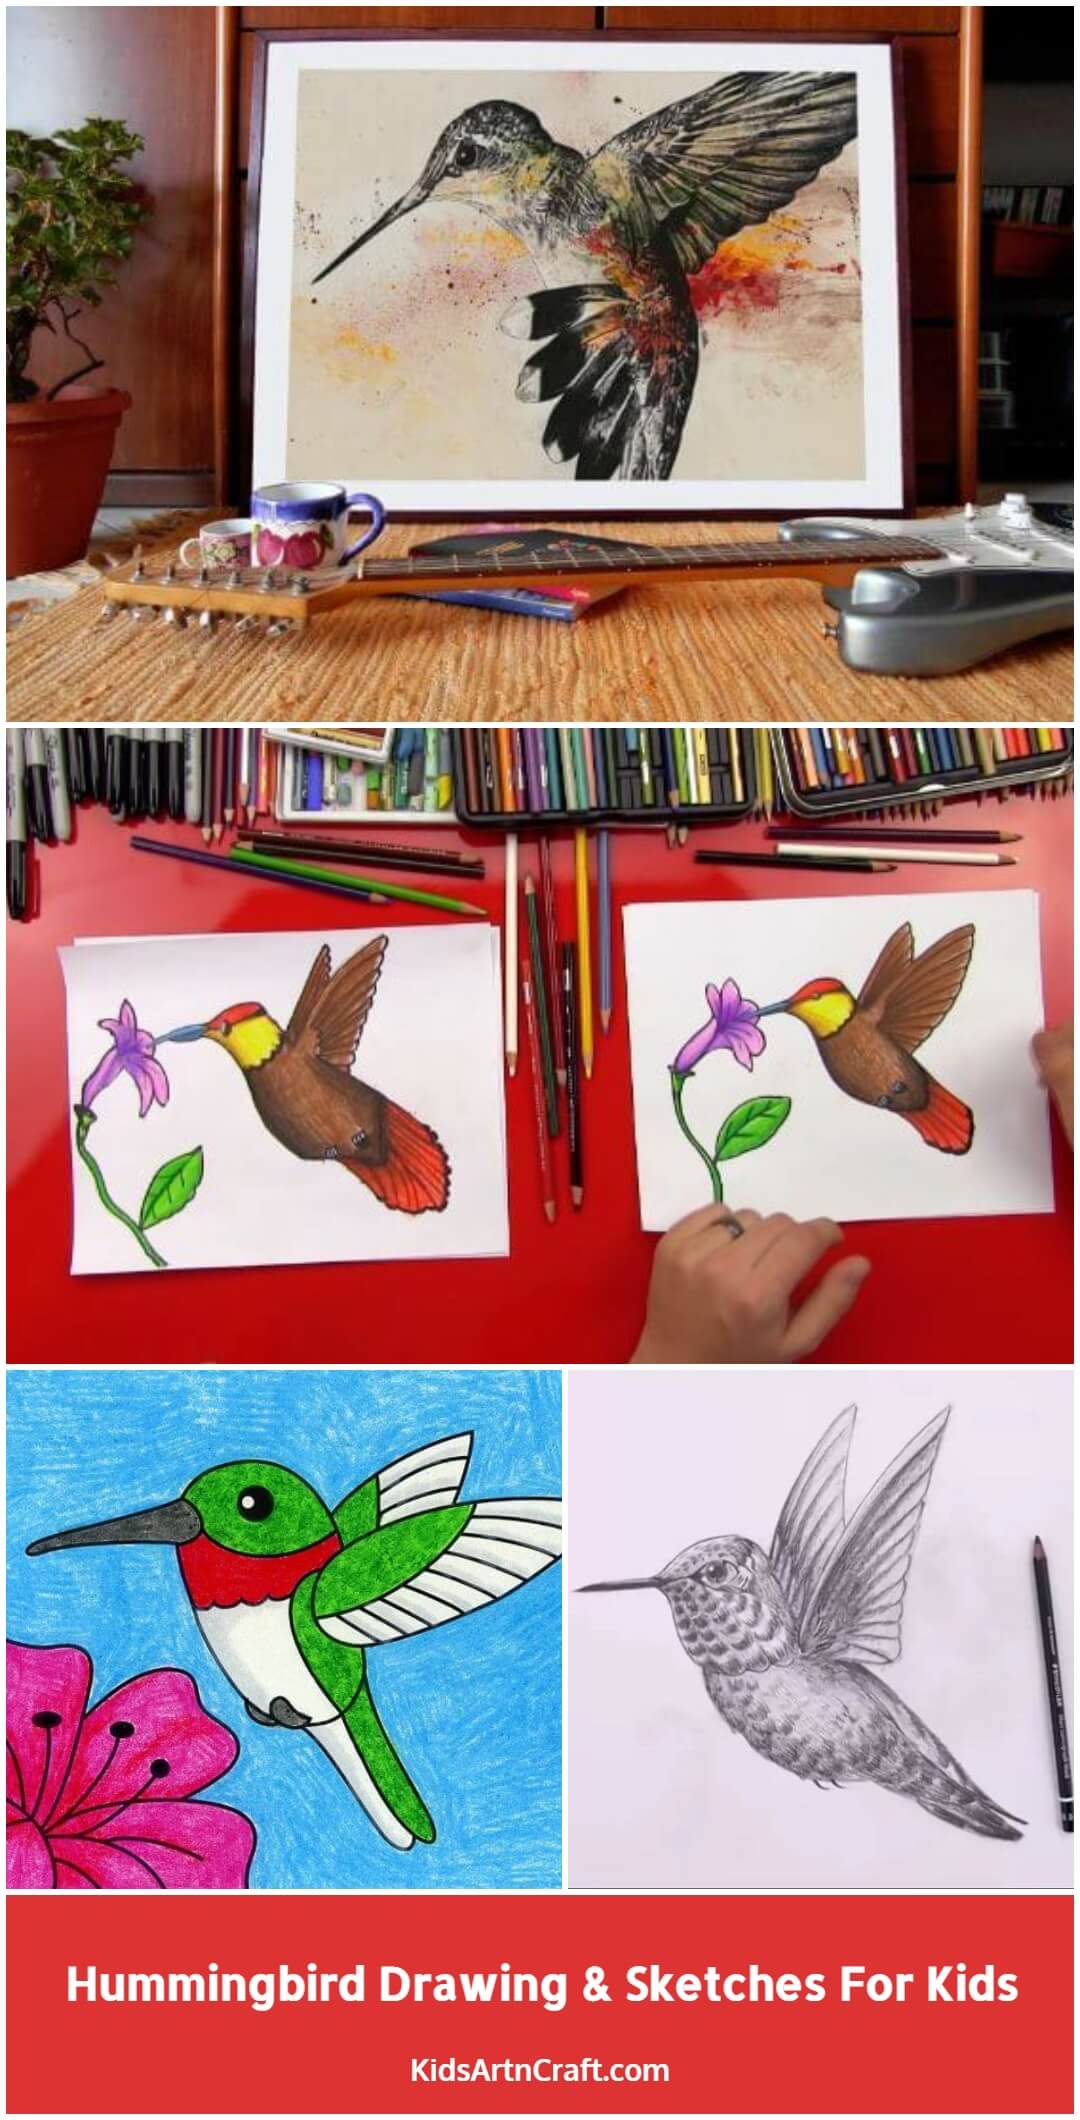 Hummingbird Drawing & Sketches For Kids